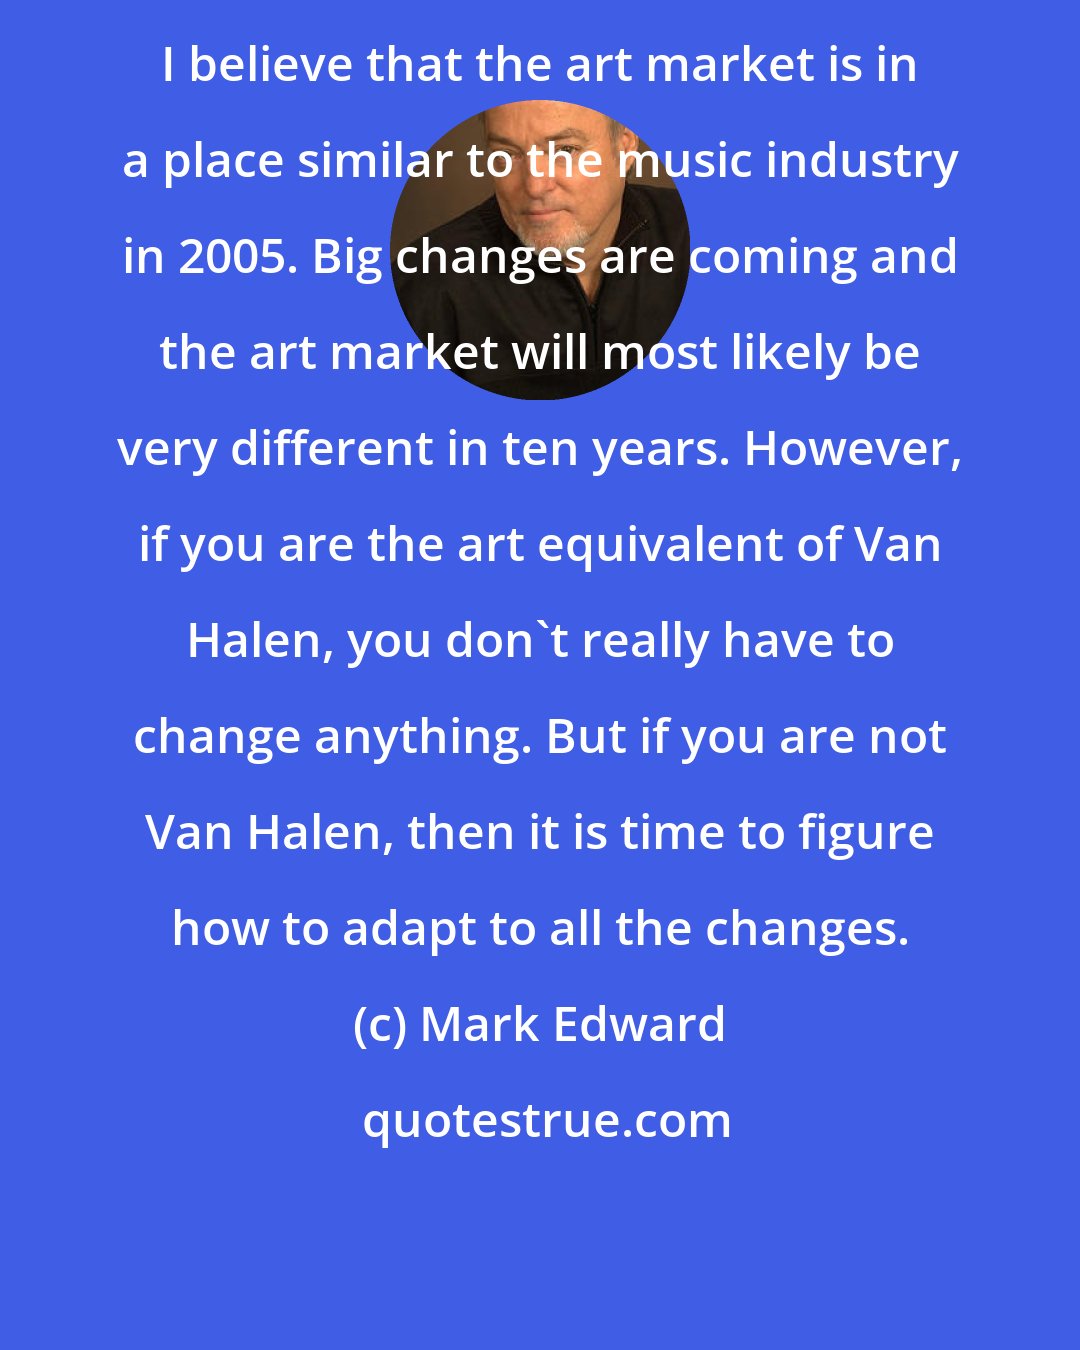 Mark Edward: I believe that the art market is in a place similar to the music industry in 2005. Big changes are coming and the art market will most likely be very different in ten years. However, if you are the art equivalent of Van Halen, you don't really have to change anything. But if you are not Van Halen, then it is time to figure how to adapt to all the changes.